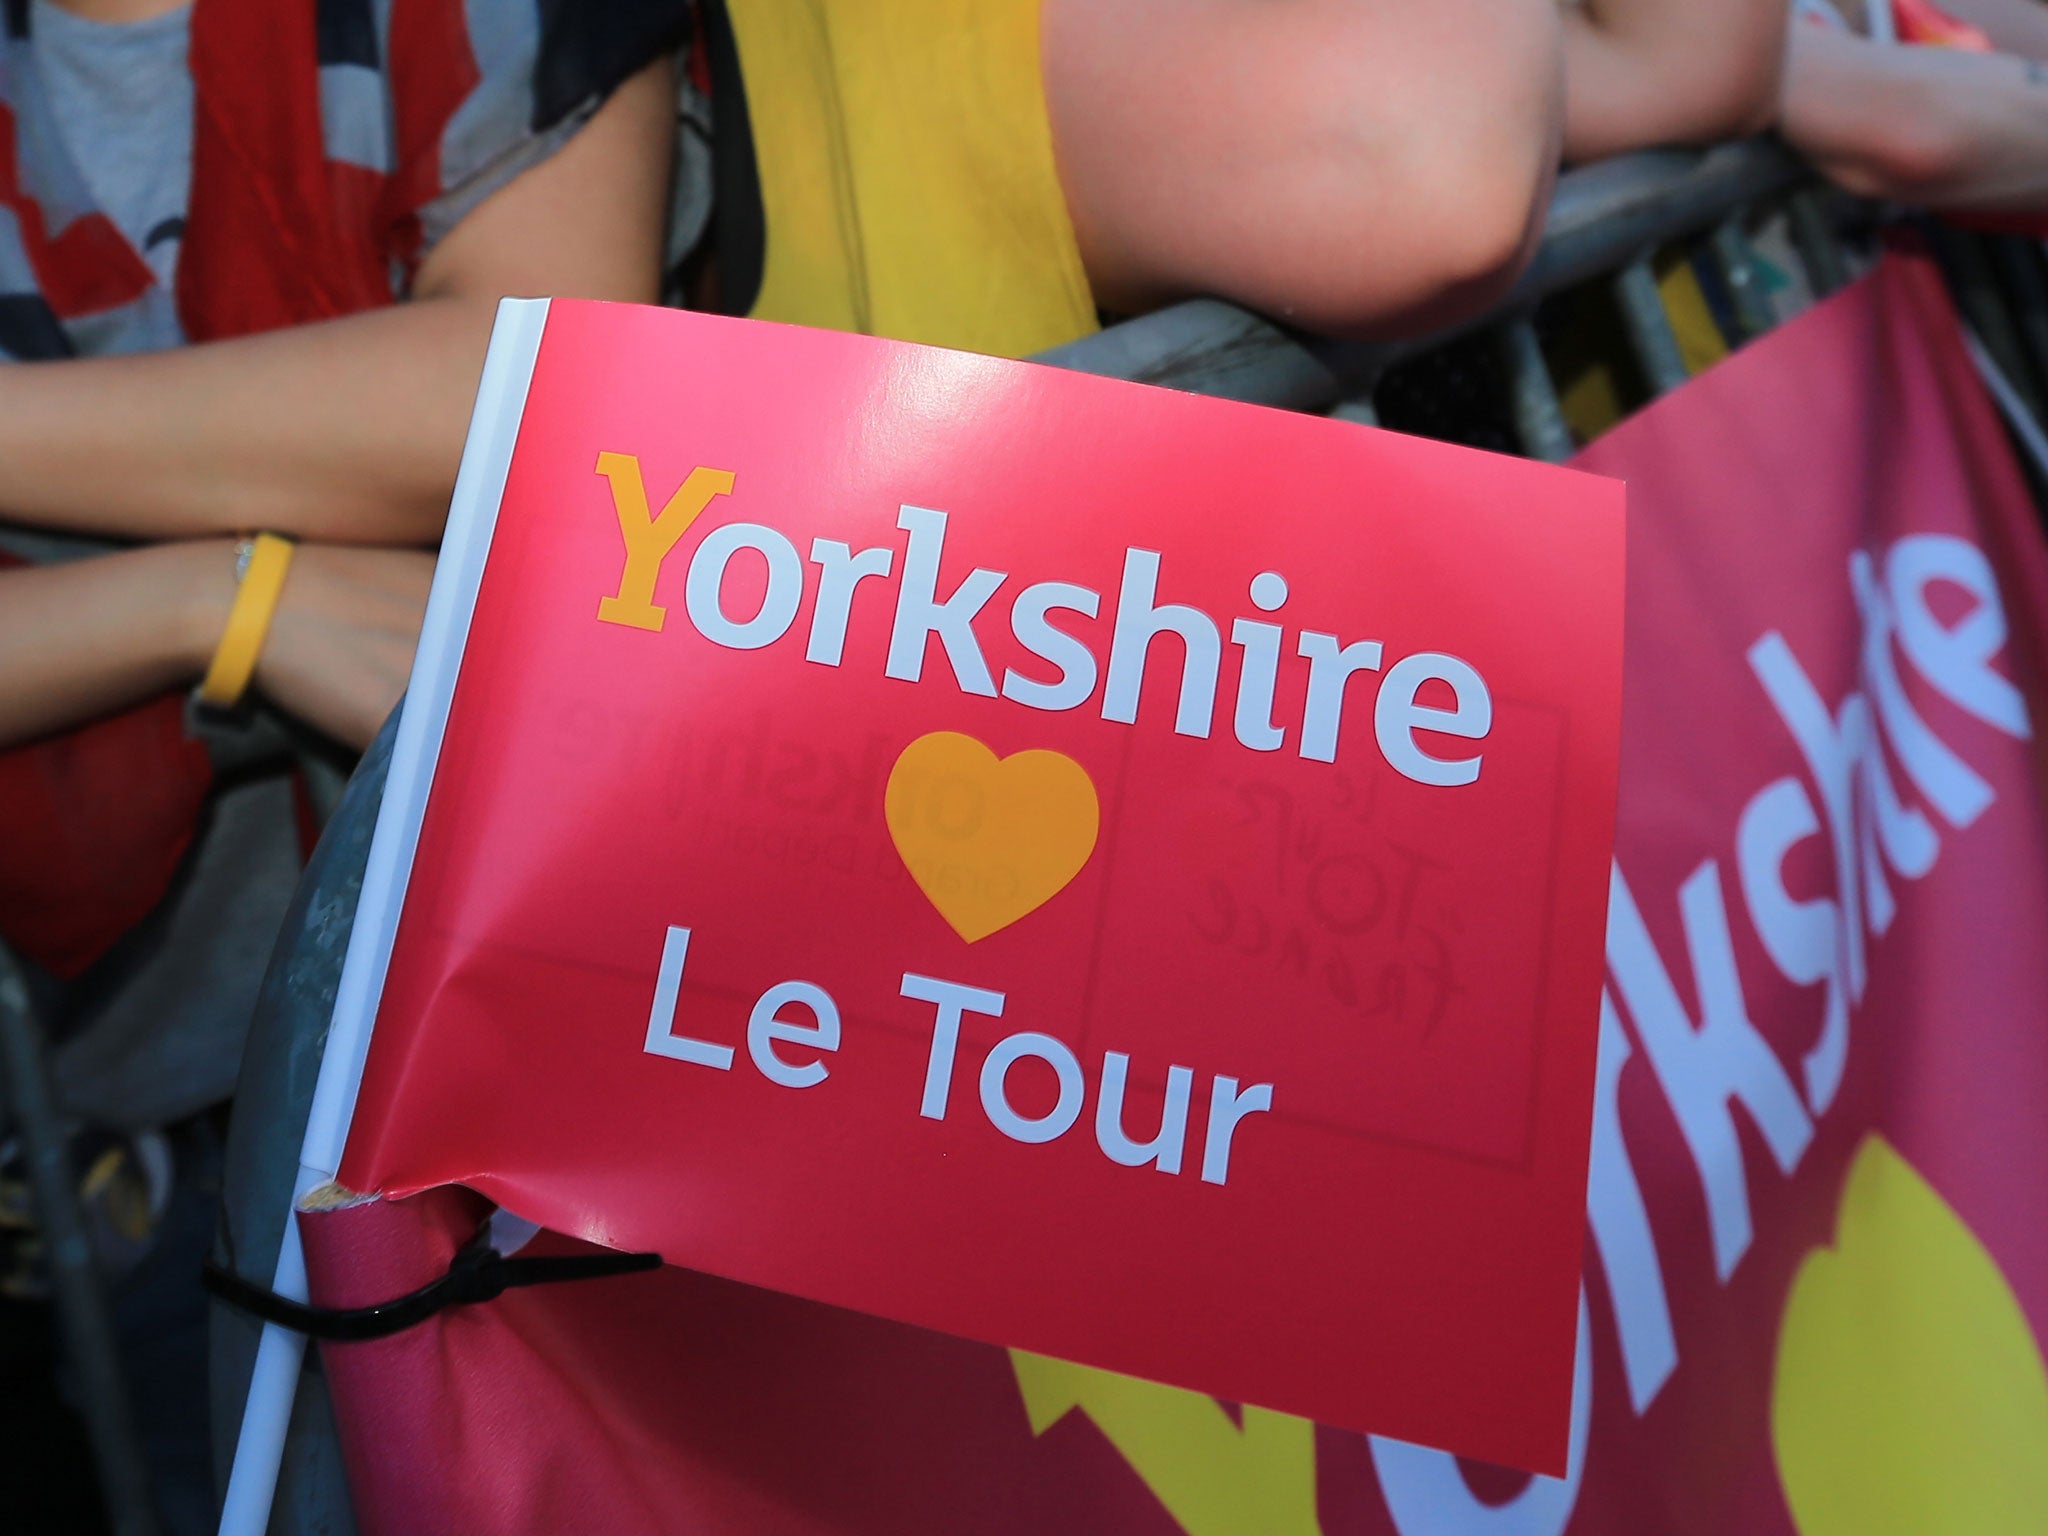 The Tour will begin in Yorkshire for the first time in its history